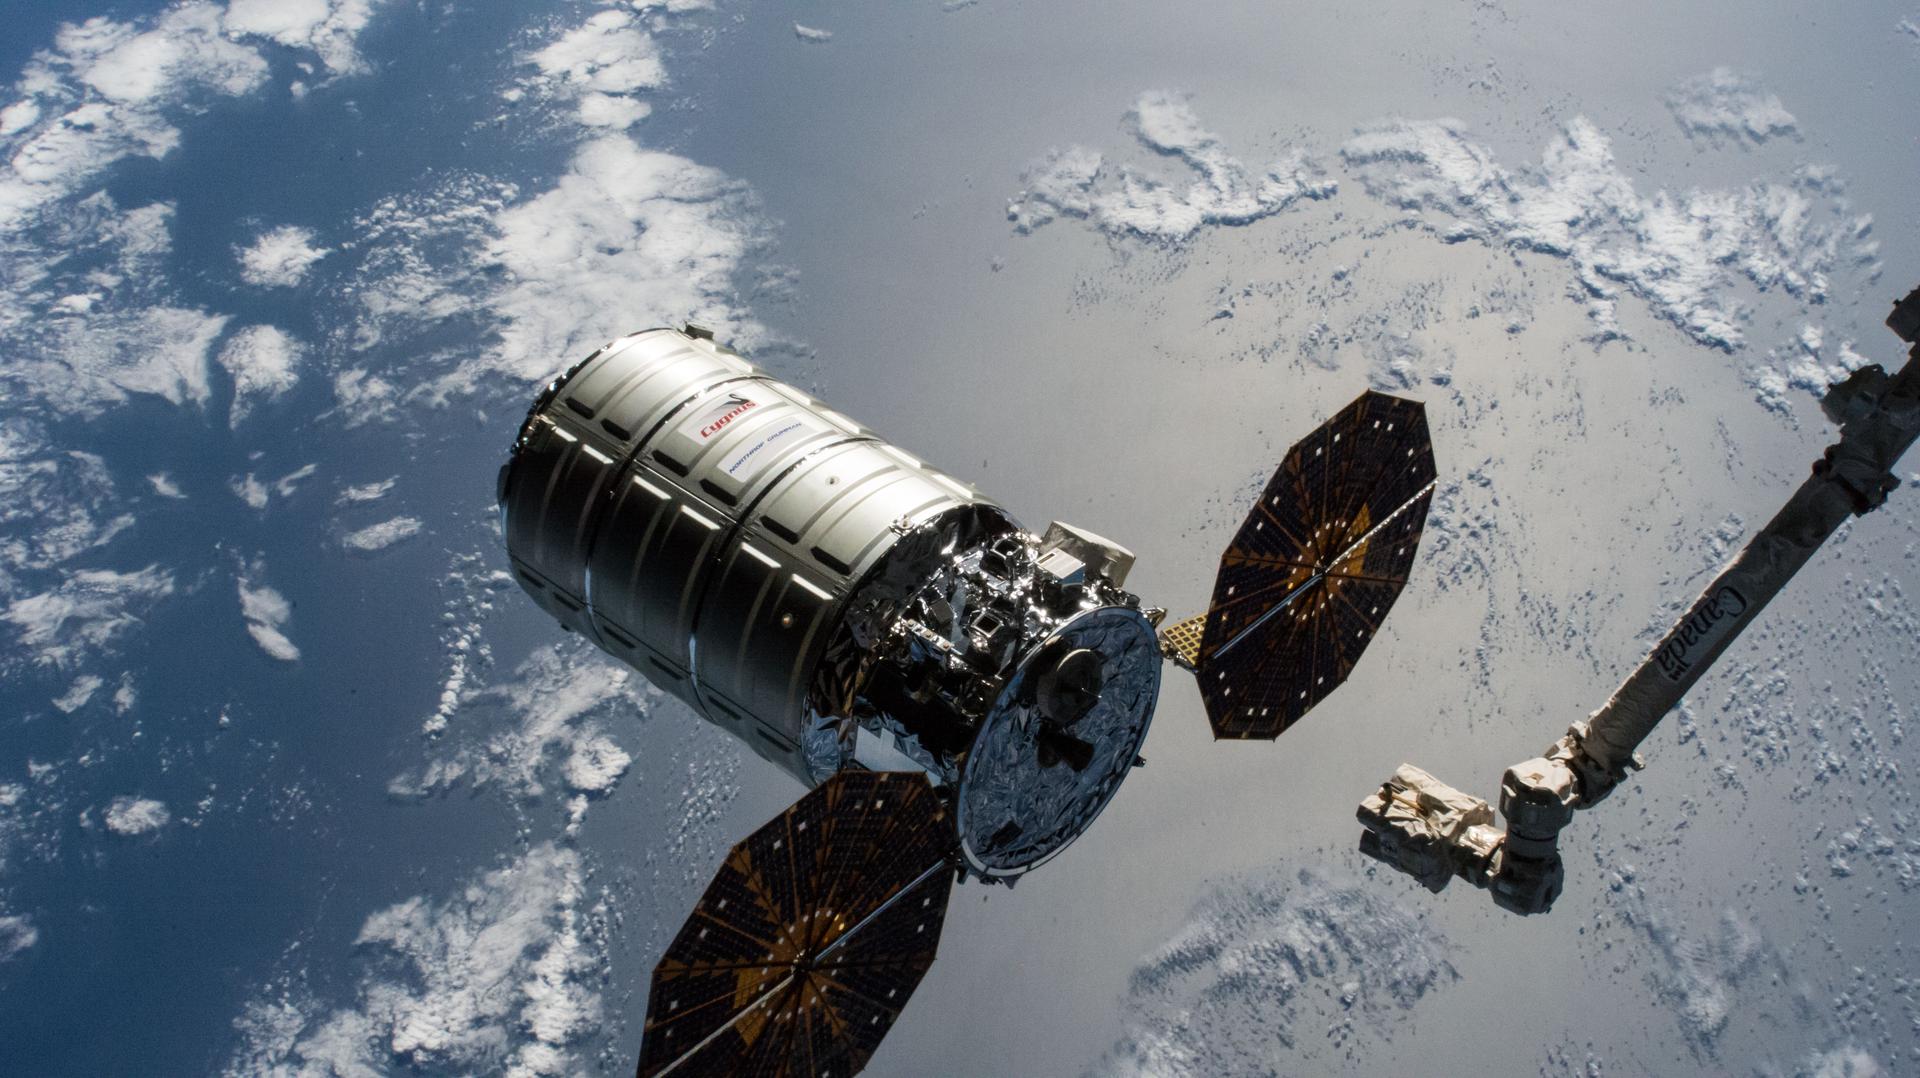 NG-18 Cygnus Release & Reentry Event image